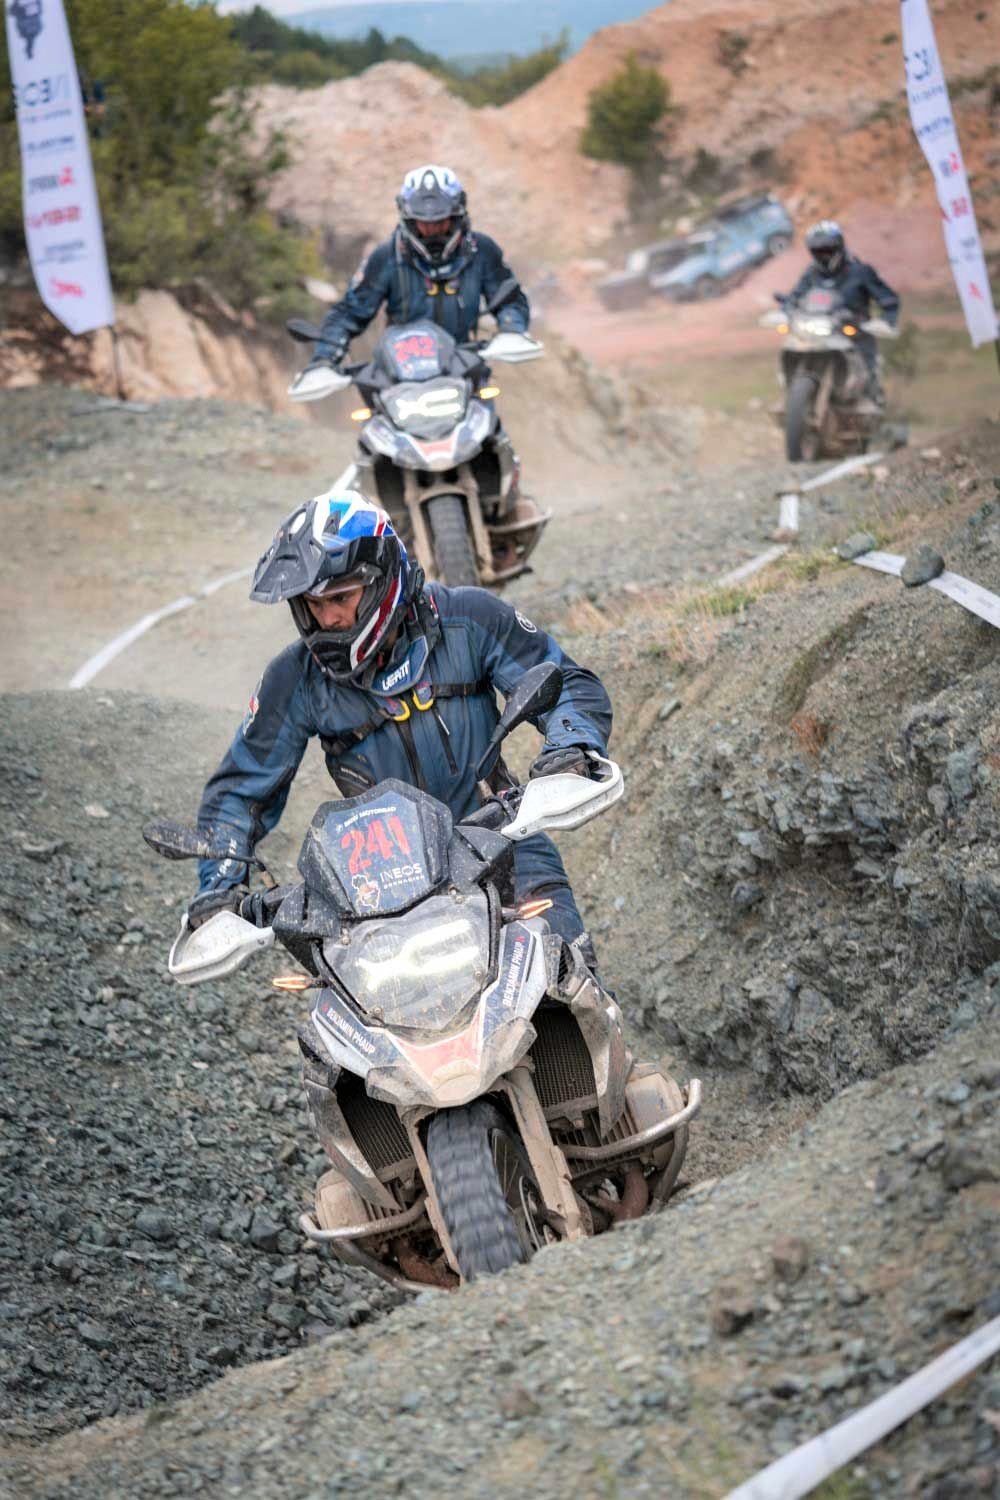 The US team on BMW R 1250 GS machines in action at the GS Trophy event in Albania. The team finished fifth in that contest.